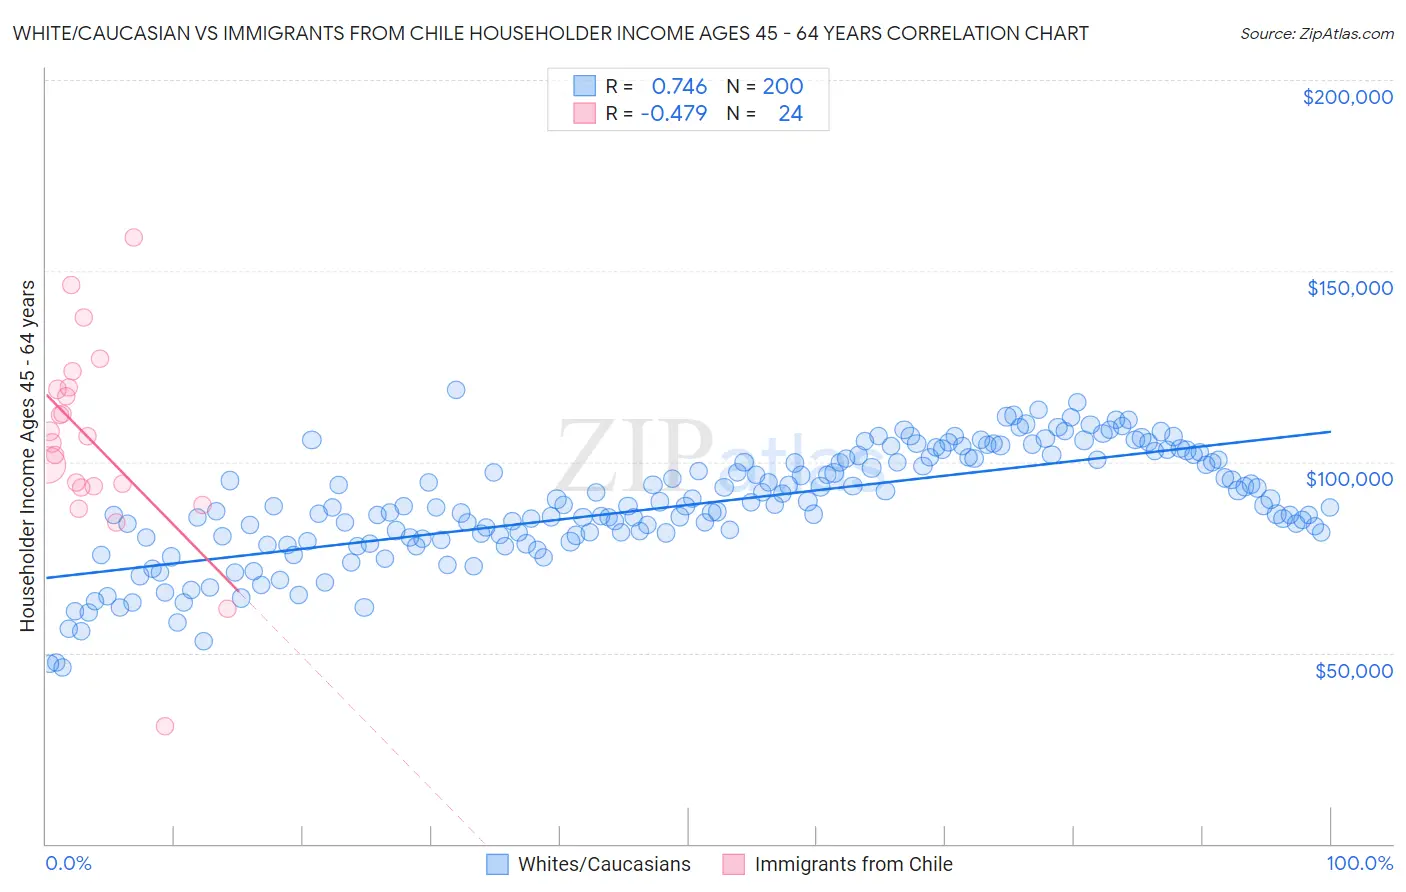 White/Caucasian vs Immigrants from Chile Householder Income Ages 45 - 64 years